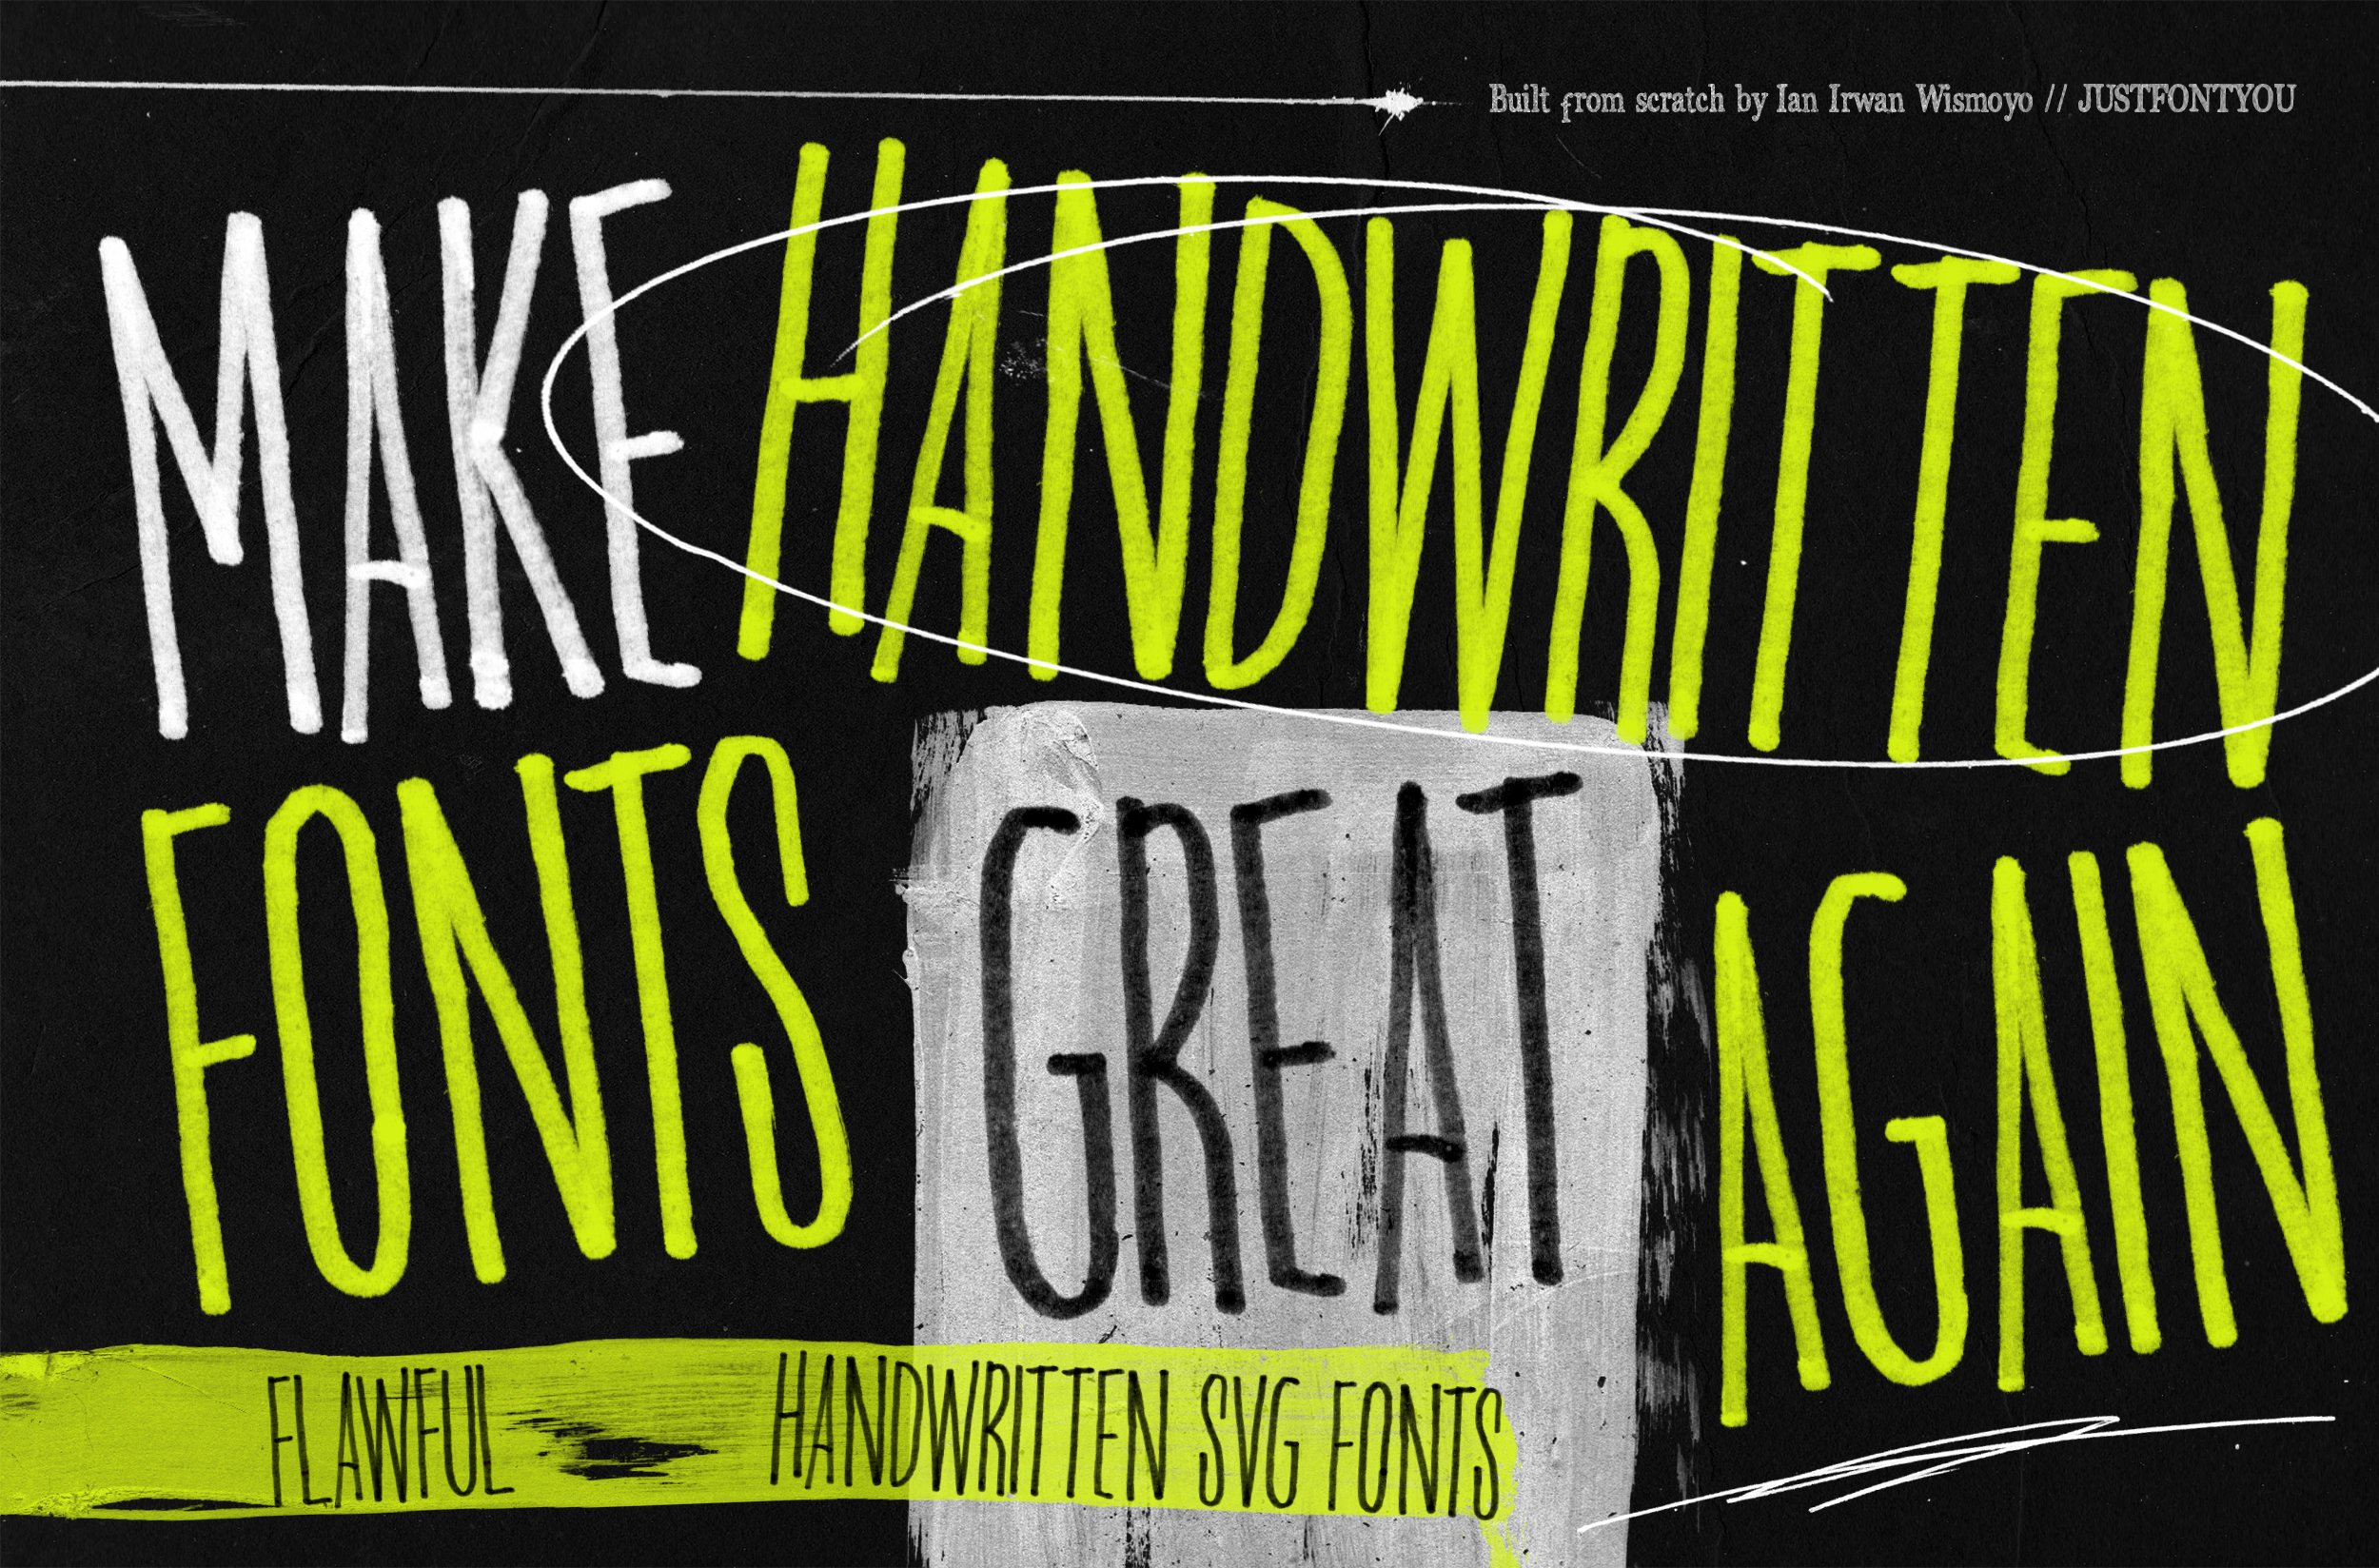 Flawful - Handwriting SVG Fonts cover image.